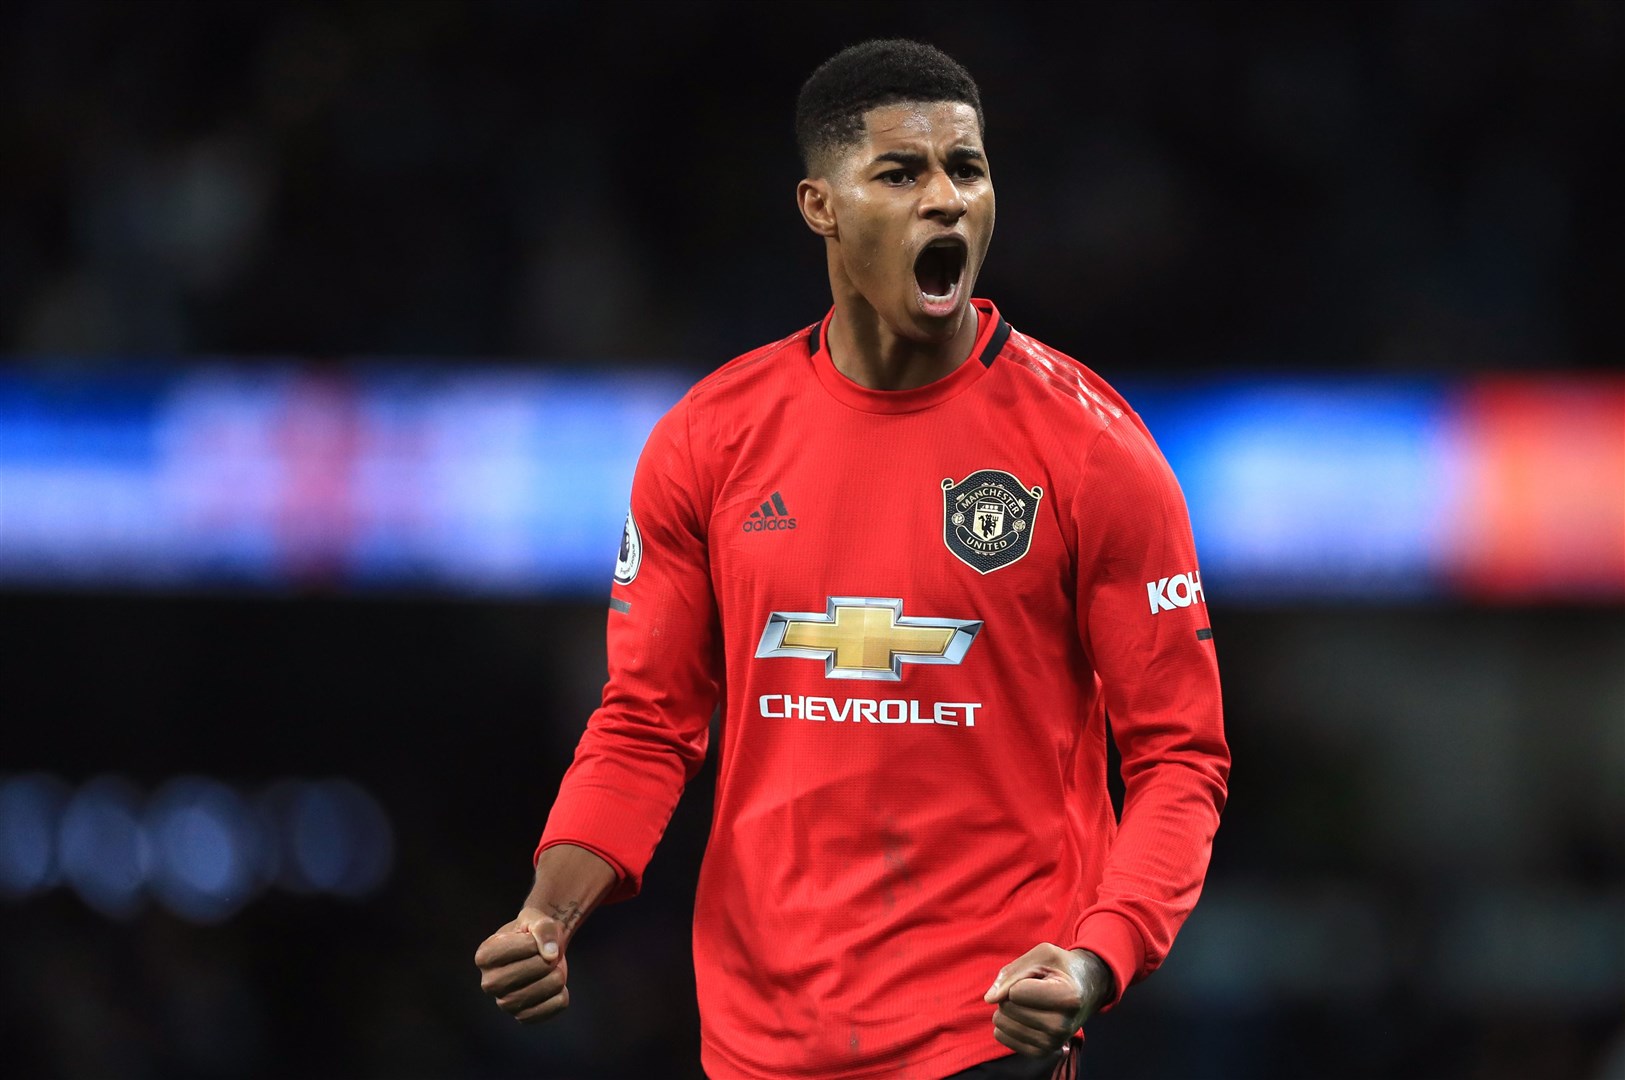 Footballer Marcus Rashford was made an MBE for services to vulnerable children in the UK during the Covid-19 outbreak in the Queen’s Birthday Honours List 2020 (Mike Egerton/2020)